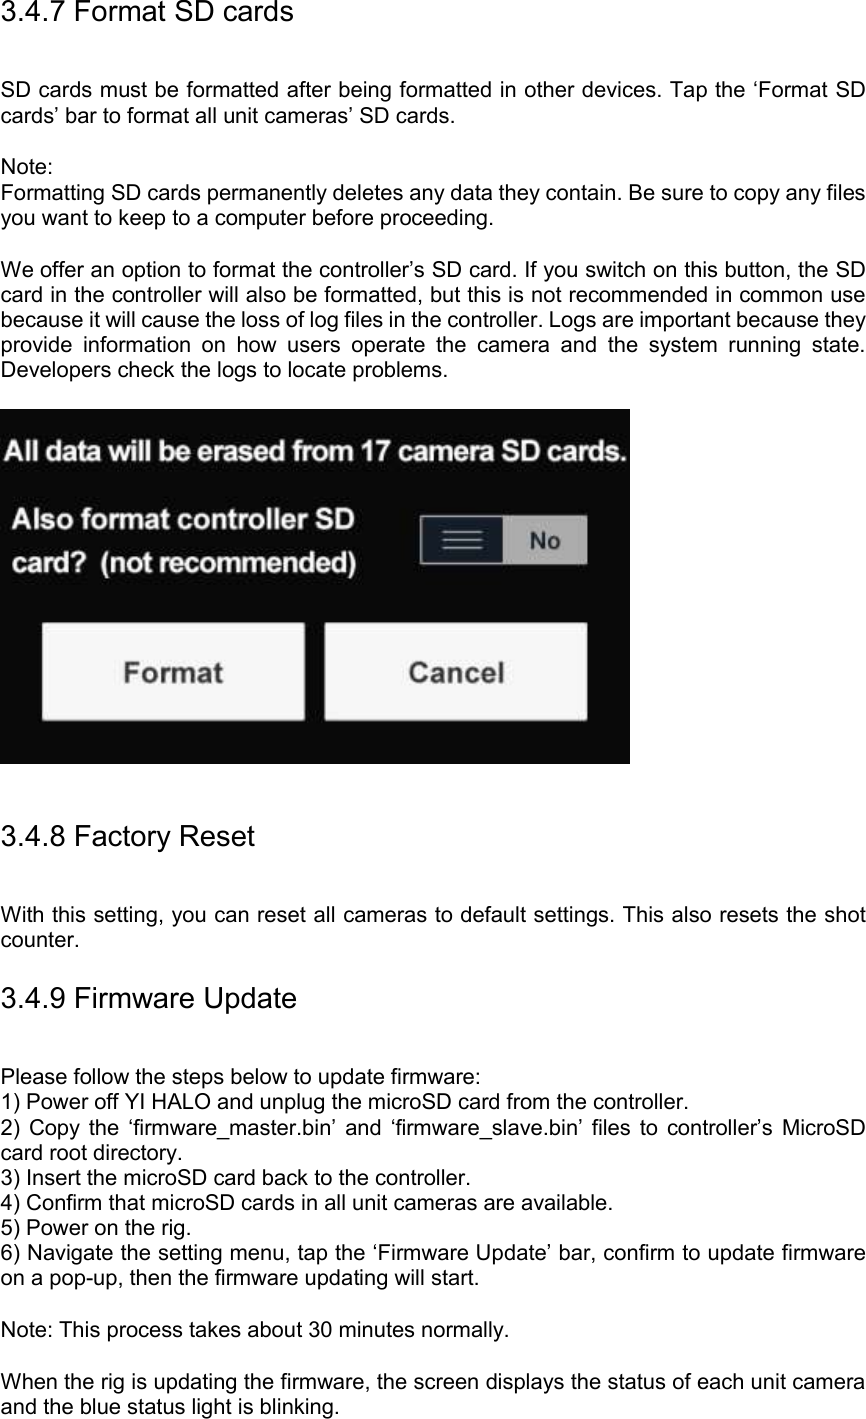 3.4.7 Format SD cards SD cards must be formatted after being formatted in other devices. Tap the ‘Format SD cards’ bar to format all unit cameras’ SD cards.  Note: Formatting SD cards permanently deletes any data they contain. Be sure to copy any files you want to keep to a computer before proceeding.  We offer an option to format the controller’s SD card. If you switch on this button, the SD card in the controller will also be formatted, but this is not recommended in common use because it will cause the loss of log files in the controller. Logs are important because they provide  information  on  how  users  operate  the  camera  and  the  system  running  state. Developers check the logs to locate problems.       3.4.8 Factory Reset With this setting, you can reset all cameras to default settings. This also resets the shot counter. 3.4.9 Firmware Update Please follow the steps below to update firmware: 1) Power off YI HALO and unplug the microSD card from the controller. 2)  Copy  the  ‘firmware_master.bin’ and  ‘firmware_slave.bin’ files  to  controller’s  MicroSD card root directory. 3) Insert the microSD card back to the controller. 4) Confirm that microSD cards in all unit cameras are available. 5) Power on the rig. 6) Navigate the setting menu, tap the ‘Firmware Update’ bar, confirm to update firmware on a pop-up, then the firmware updating will start.  Note: This process takes about 30 minutes normally.  When the rig is updating the firmware, the screen displays the status of each unit camera and the blue status light is blinking.   